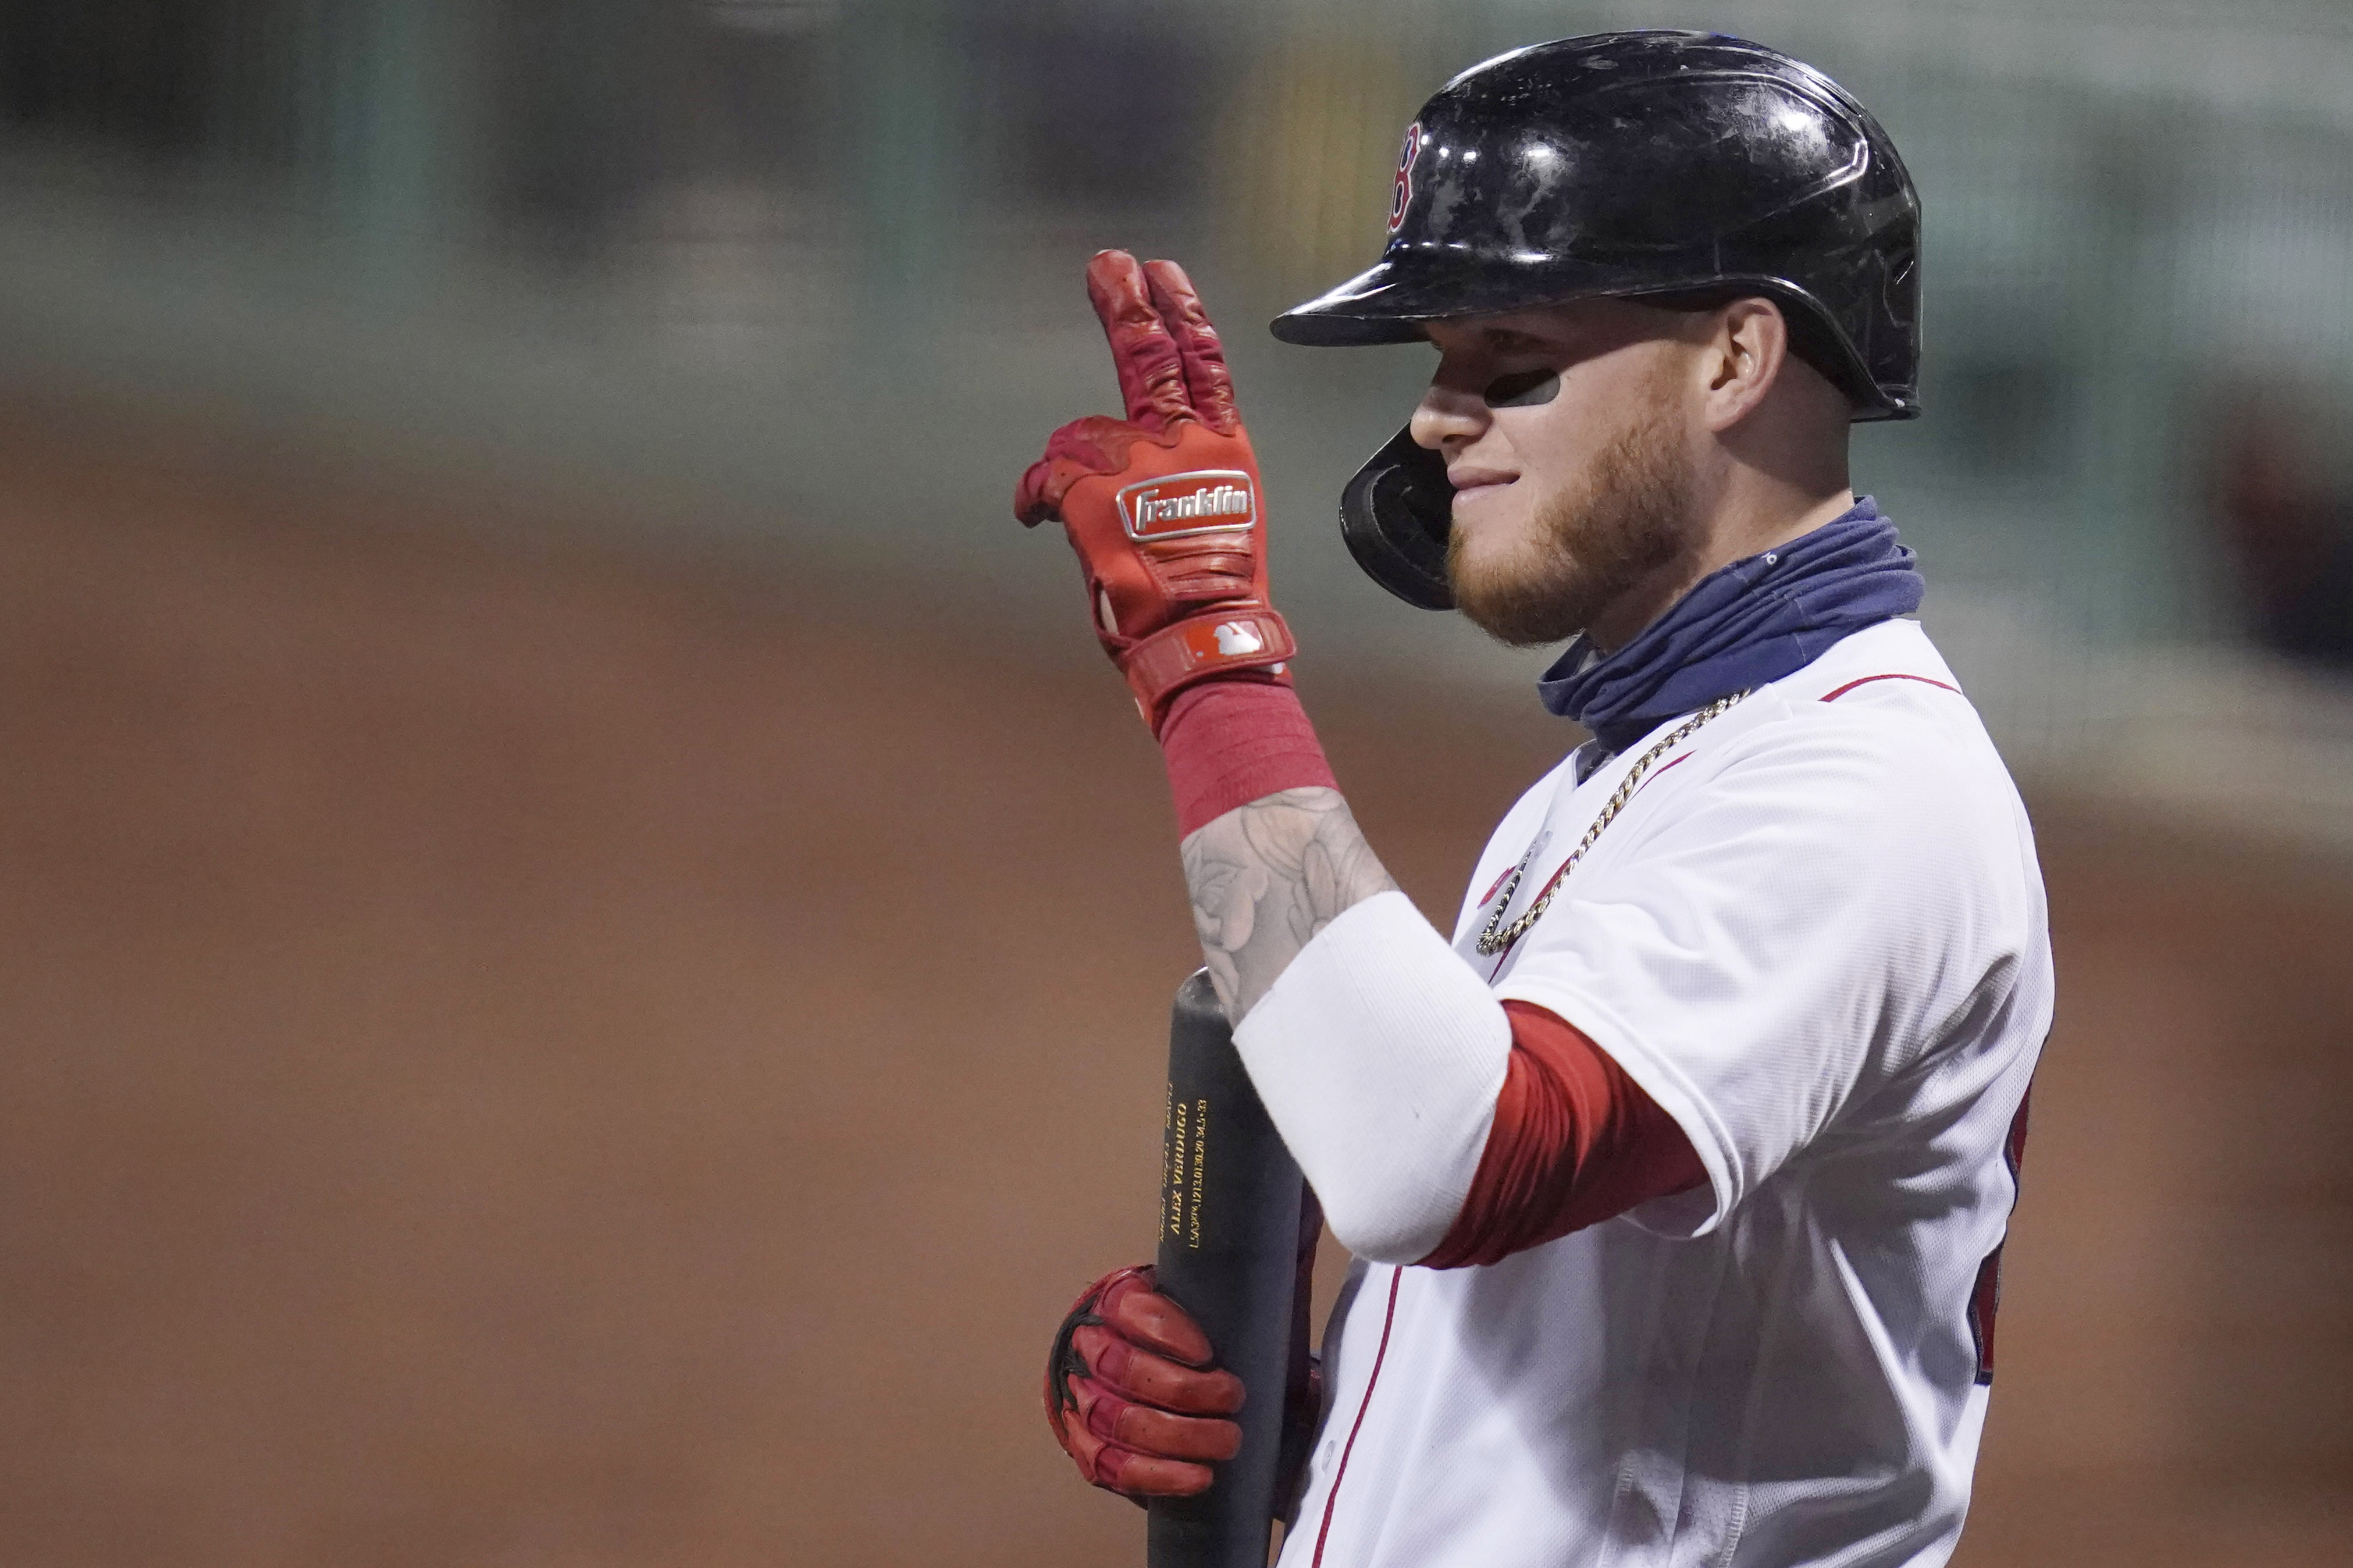 Whenever baseball resumes, says Alex Verdugo, he is ready to play